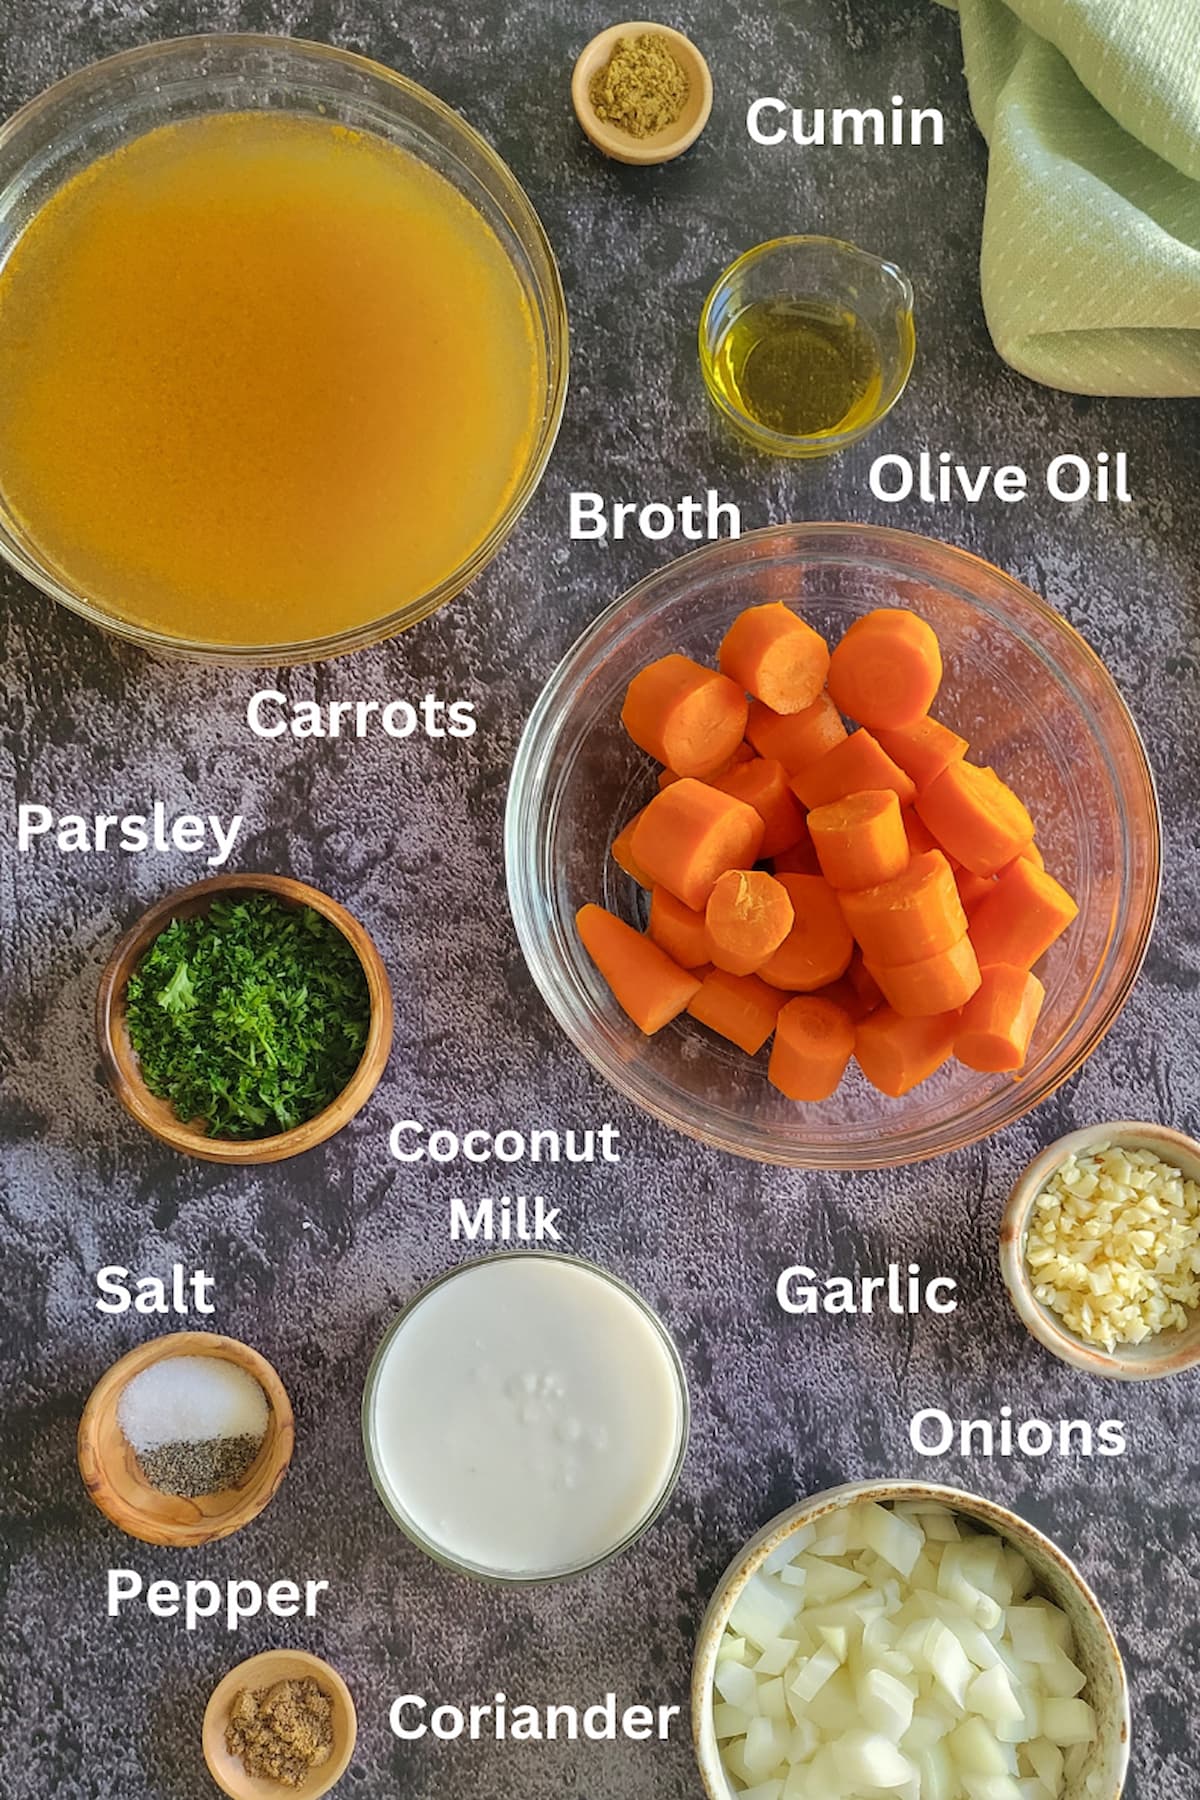 ingredients for soup with carrots - carrots, parsley, onions, garlic, salt, pepper, olive oil, cumin, coriander, coconut milk, broth